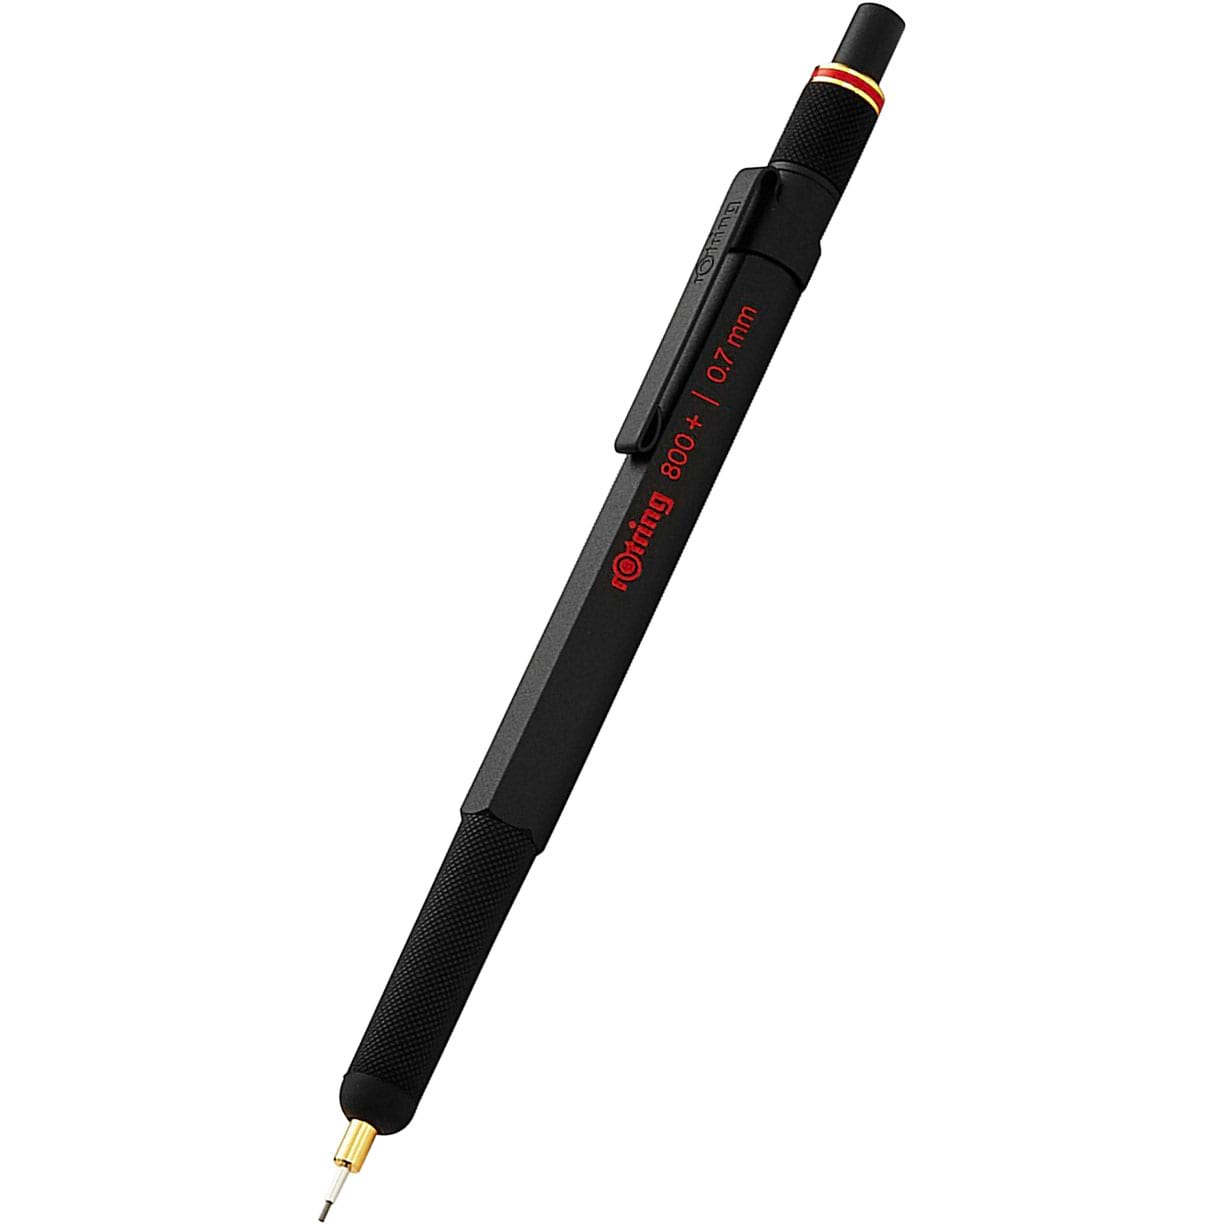 Chemie Omgeving Voorzitter Rotring 800+ 0.7mm Mechanical Pencil and Stylus - Pen Boutique Ltd